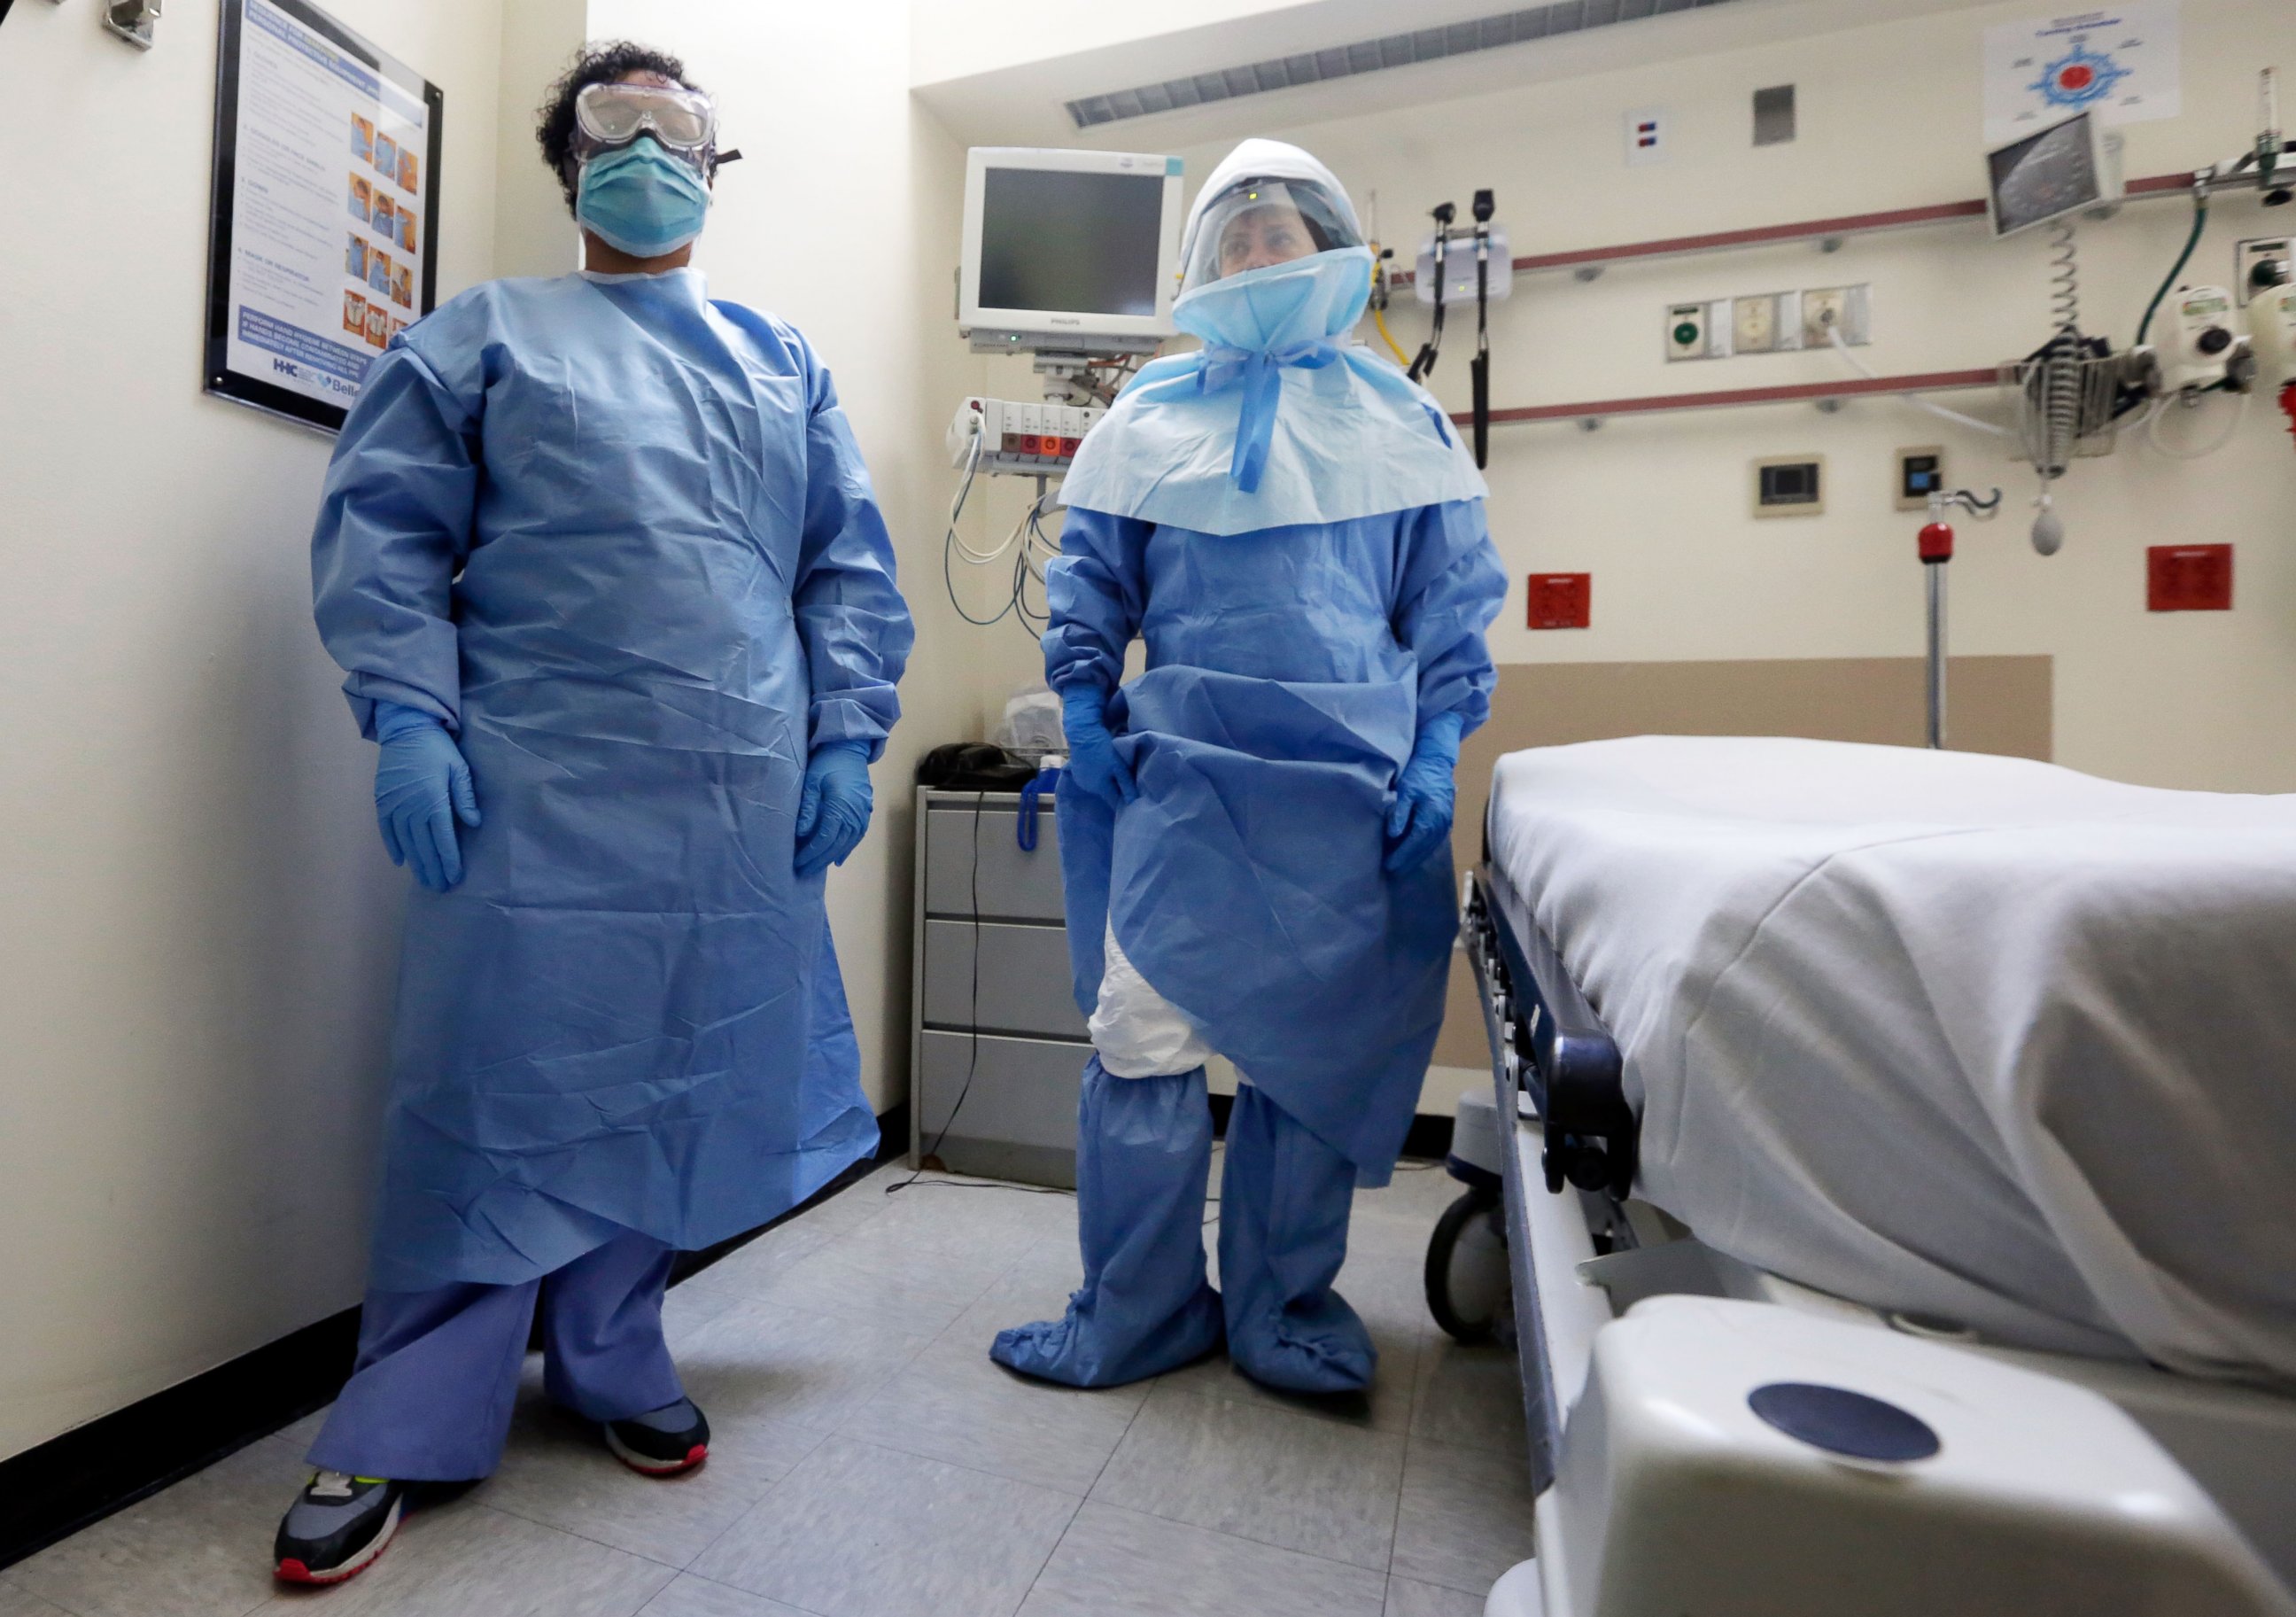 PHOTO: Belkys Fortune, left, and Teressa Celia, pose in protective suits in an isolation room during a demonstration of procedures for possible Ebola patients at Bellevue Hospital, New York, Oct. 8, 2014.